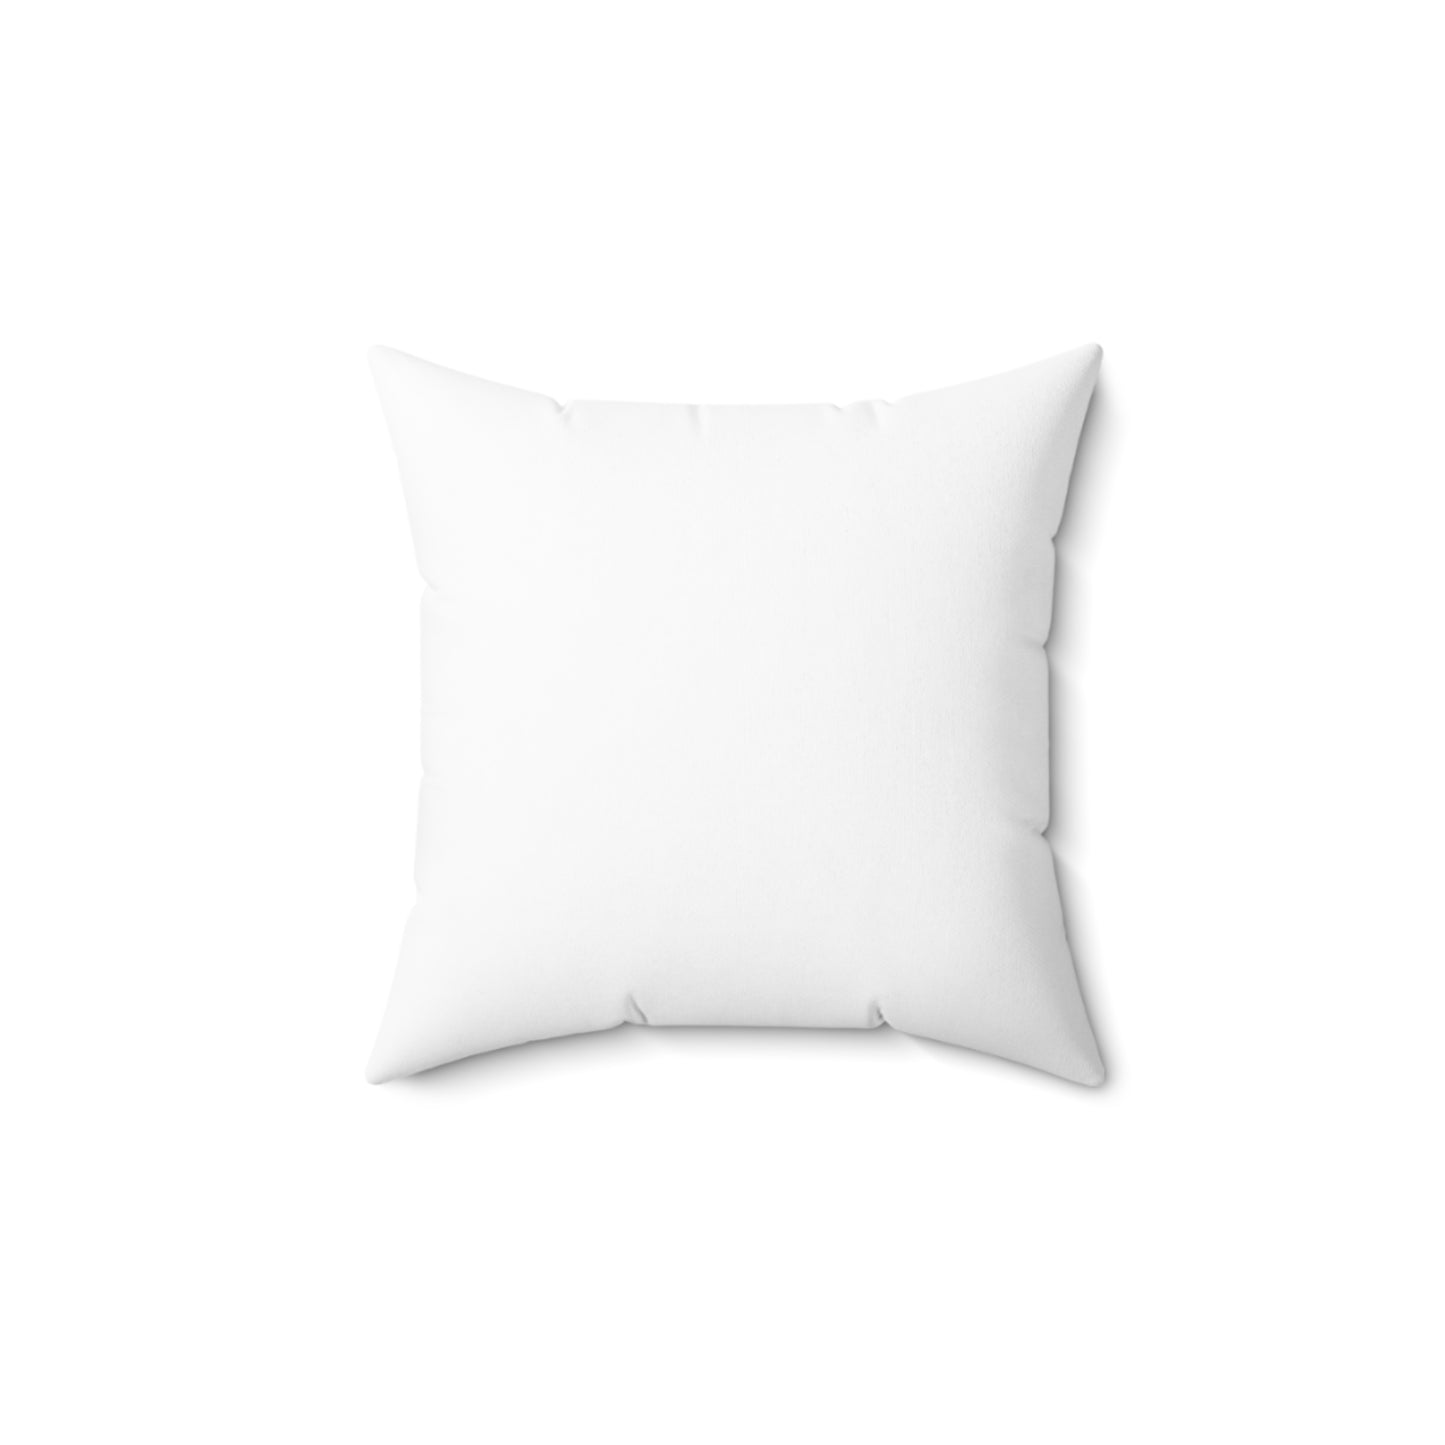 Christ Is The Way, The Truth, & The Light Of My Life Pillow